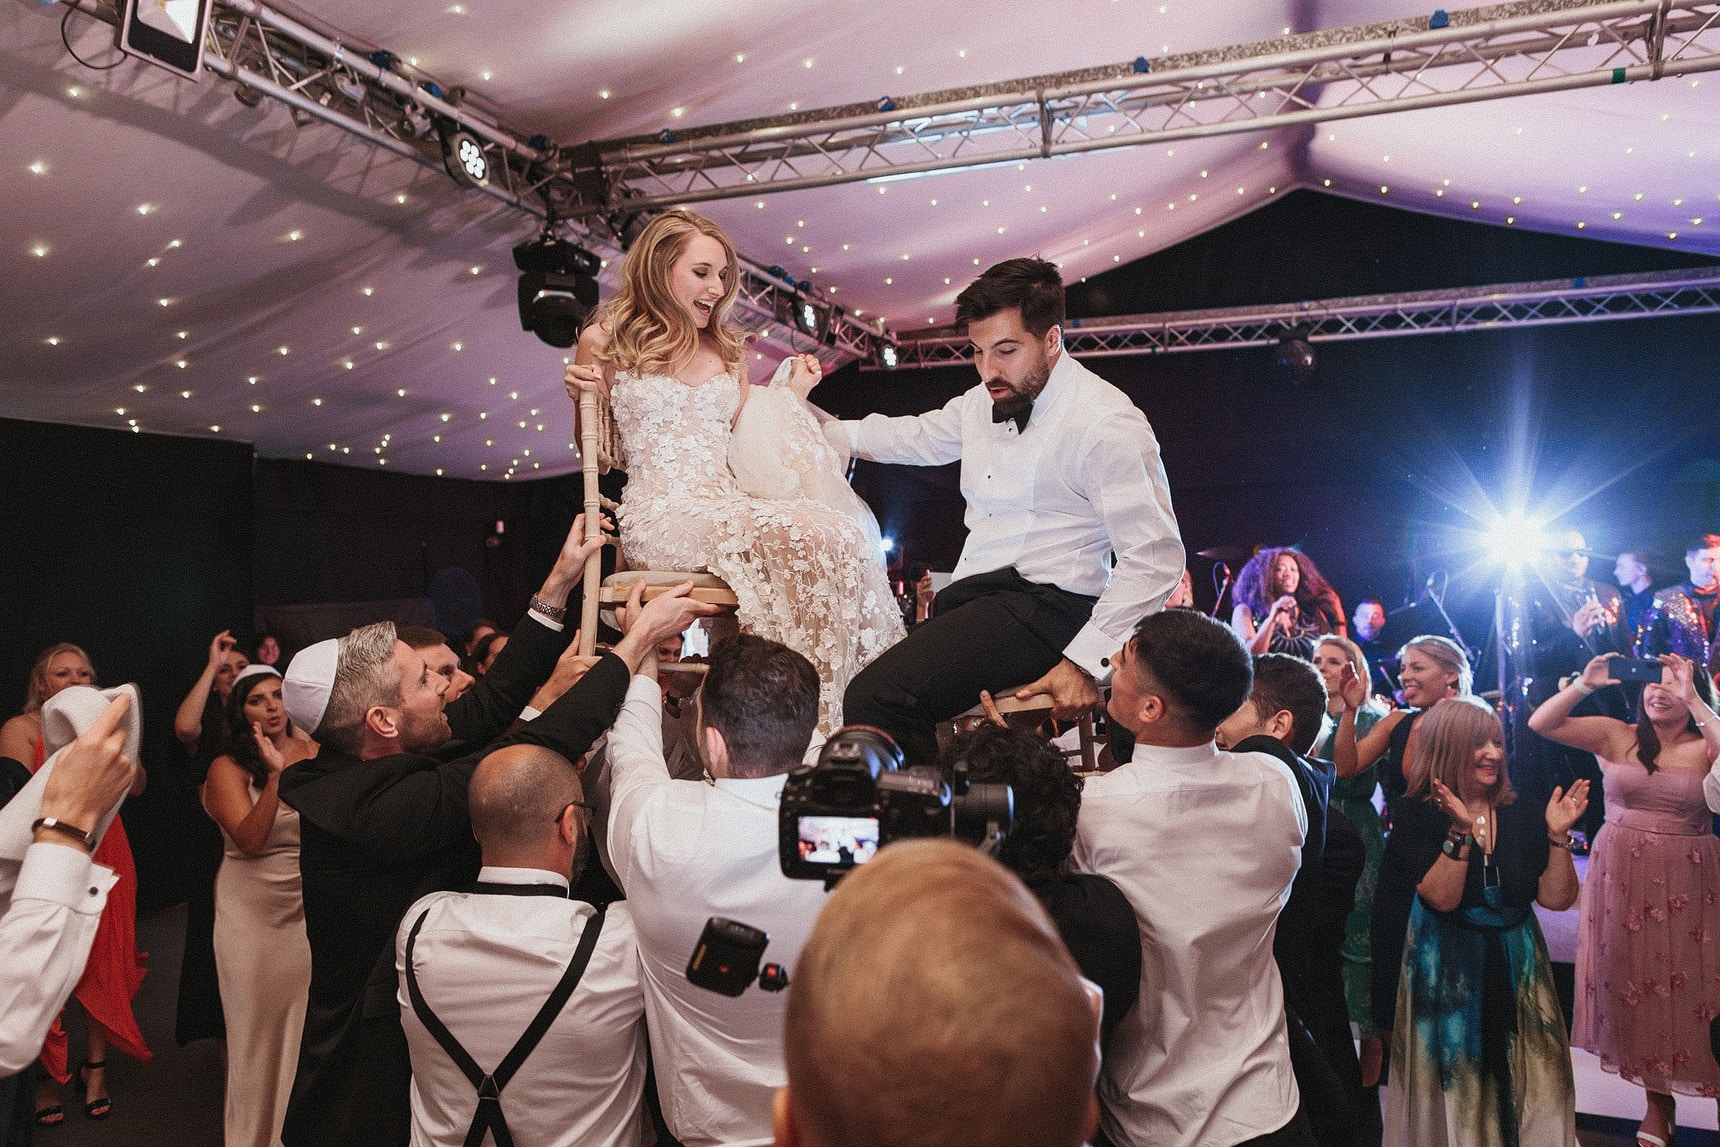 Jewish wedding with bride and groom been lifted on chairs